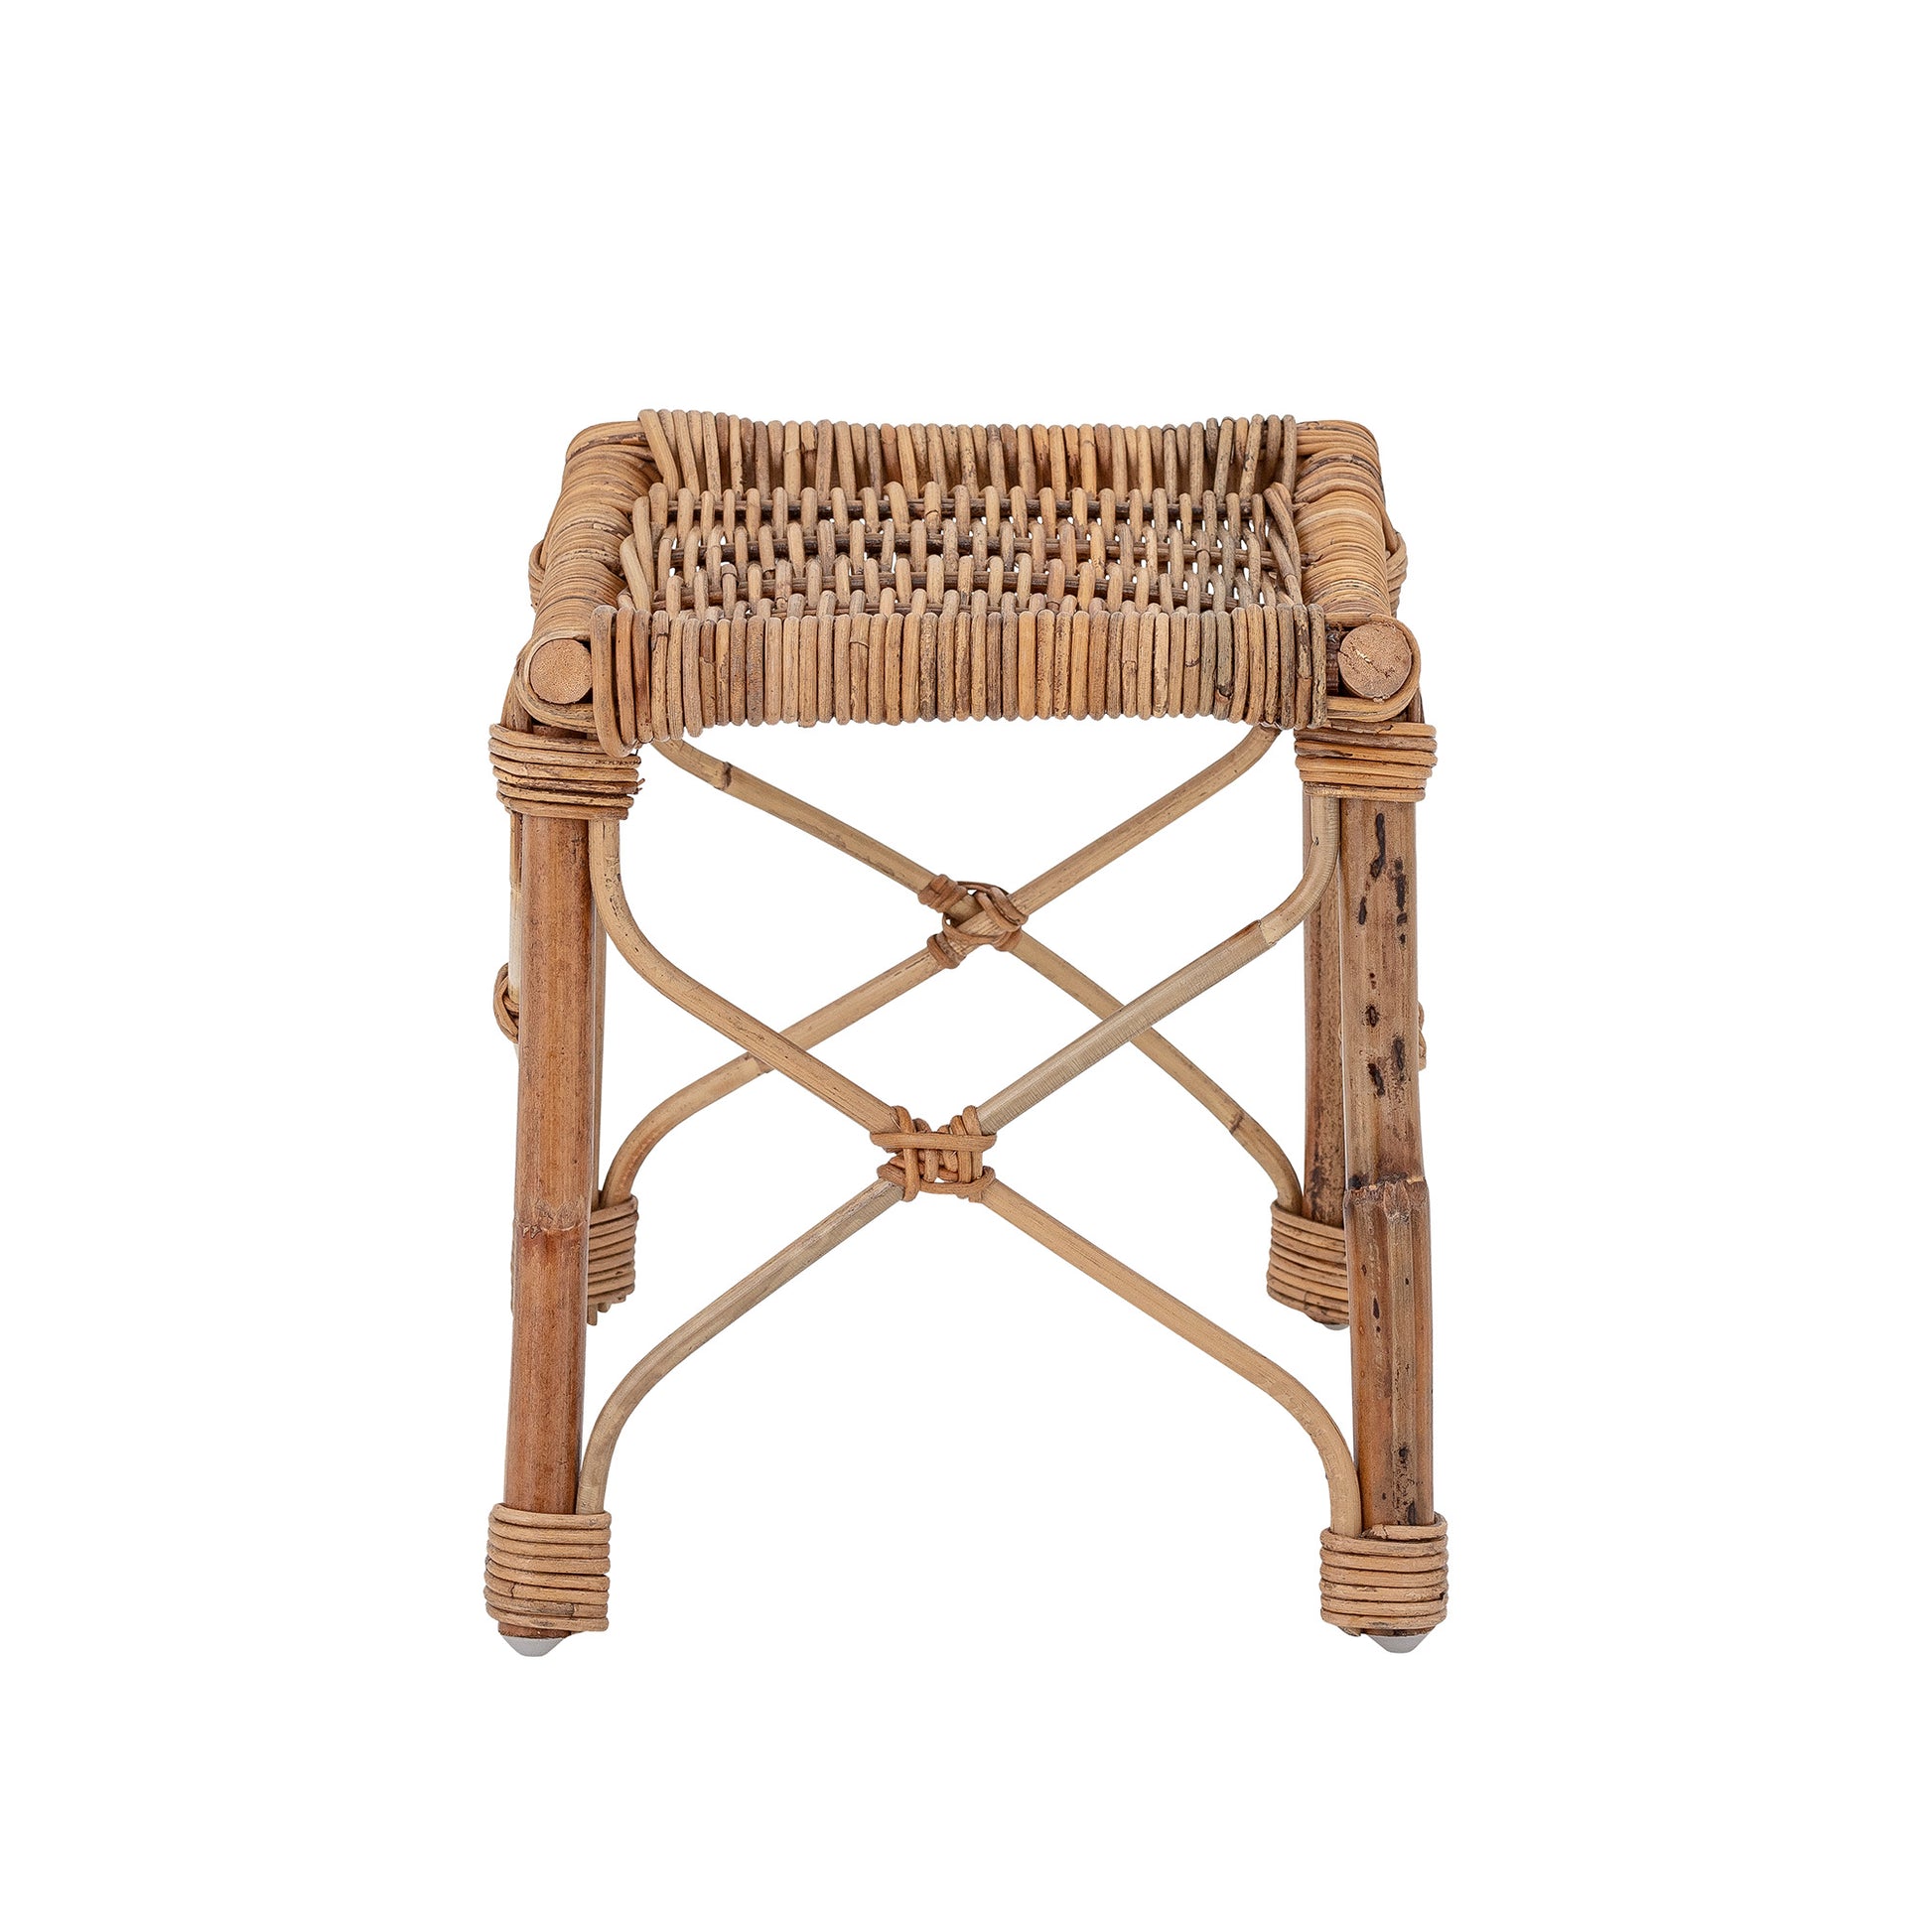 The Alberta Footrest by Bloomingville MINI is a very beautiful and useful footrest that you can use in many ways. The footrest is made of rattan and has a natural colour and is a perfect addition to the children's room.   Dimensions: L36xH28,5xW25,5 cm  Wipe clean with a moist cloth.  Variations in size & shape may occur due to materials. Indoor use only